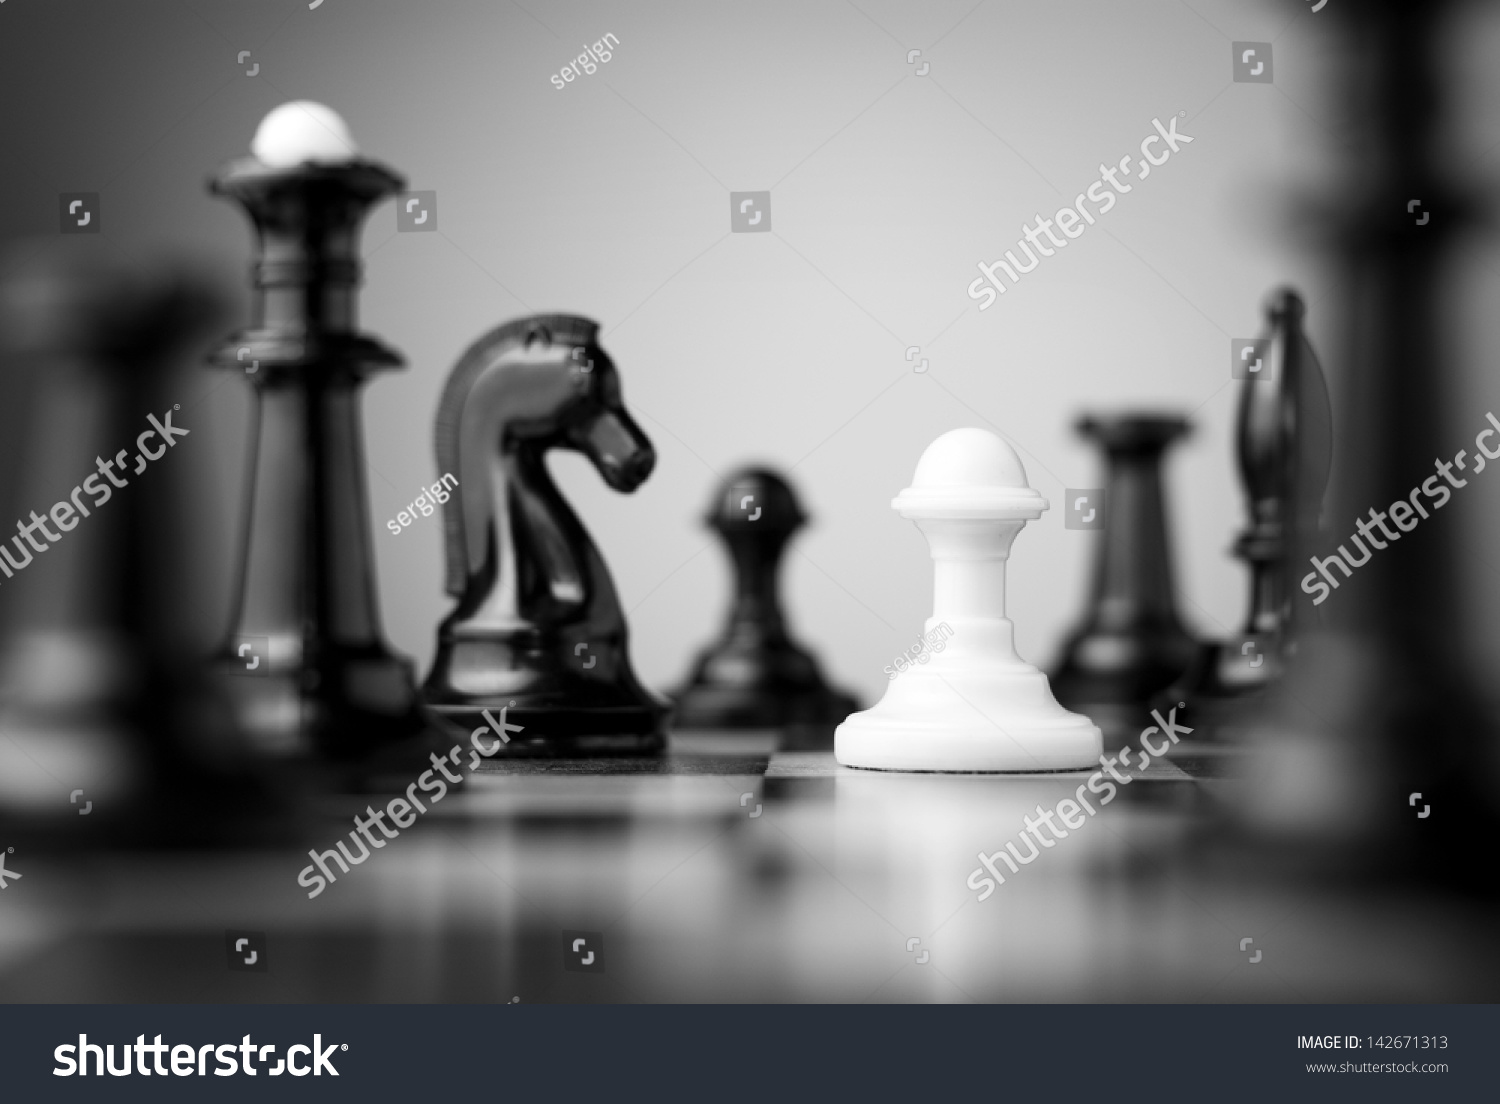 white pawn surrounded by black chess pieces on a chess board #142671313